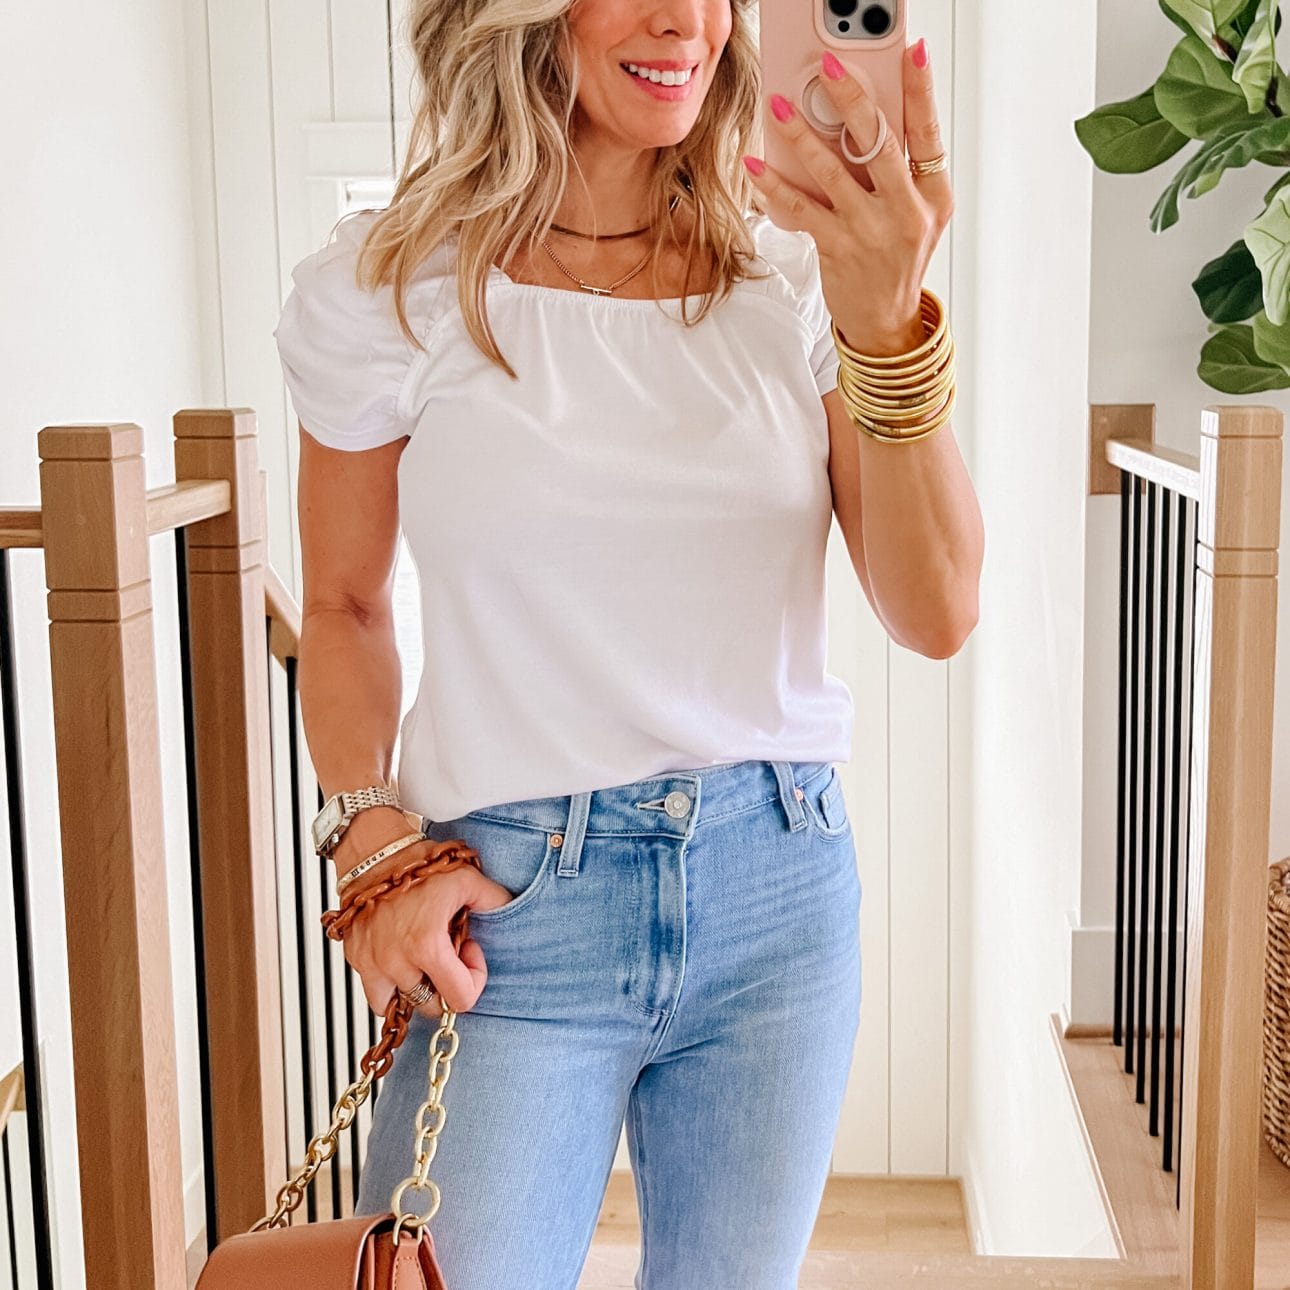 Ruched Sleeve Tee, Jeans, Wedges